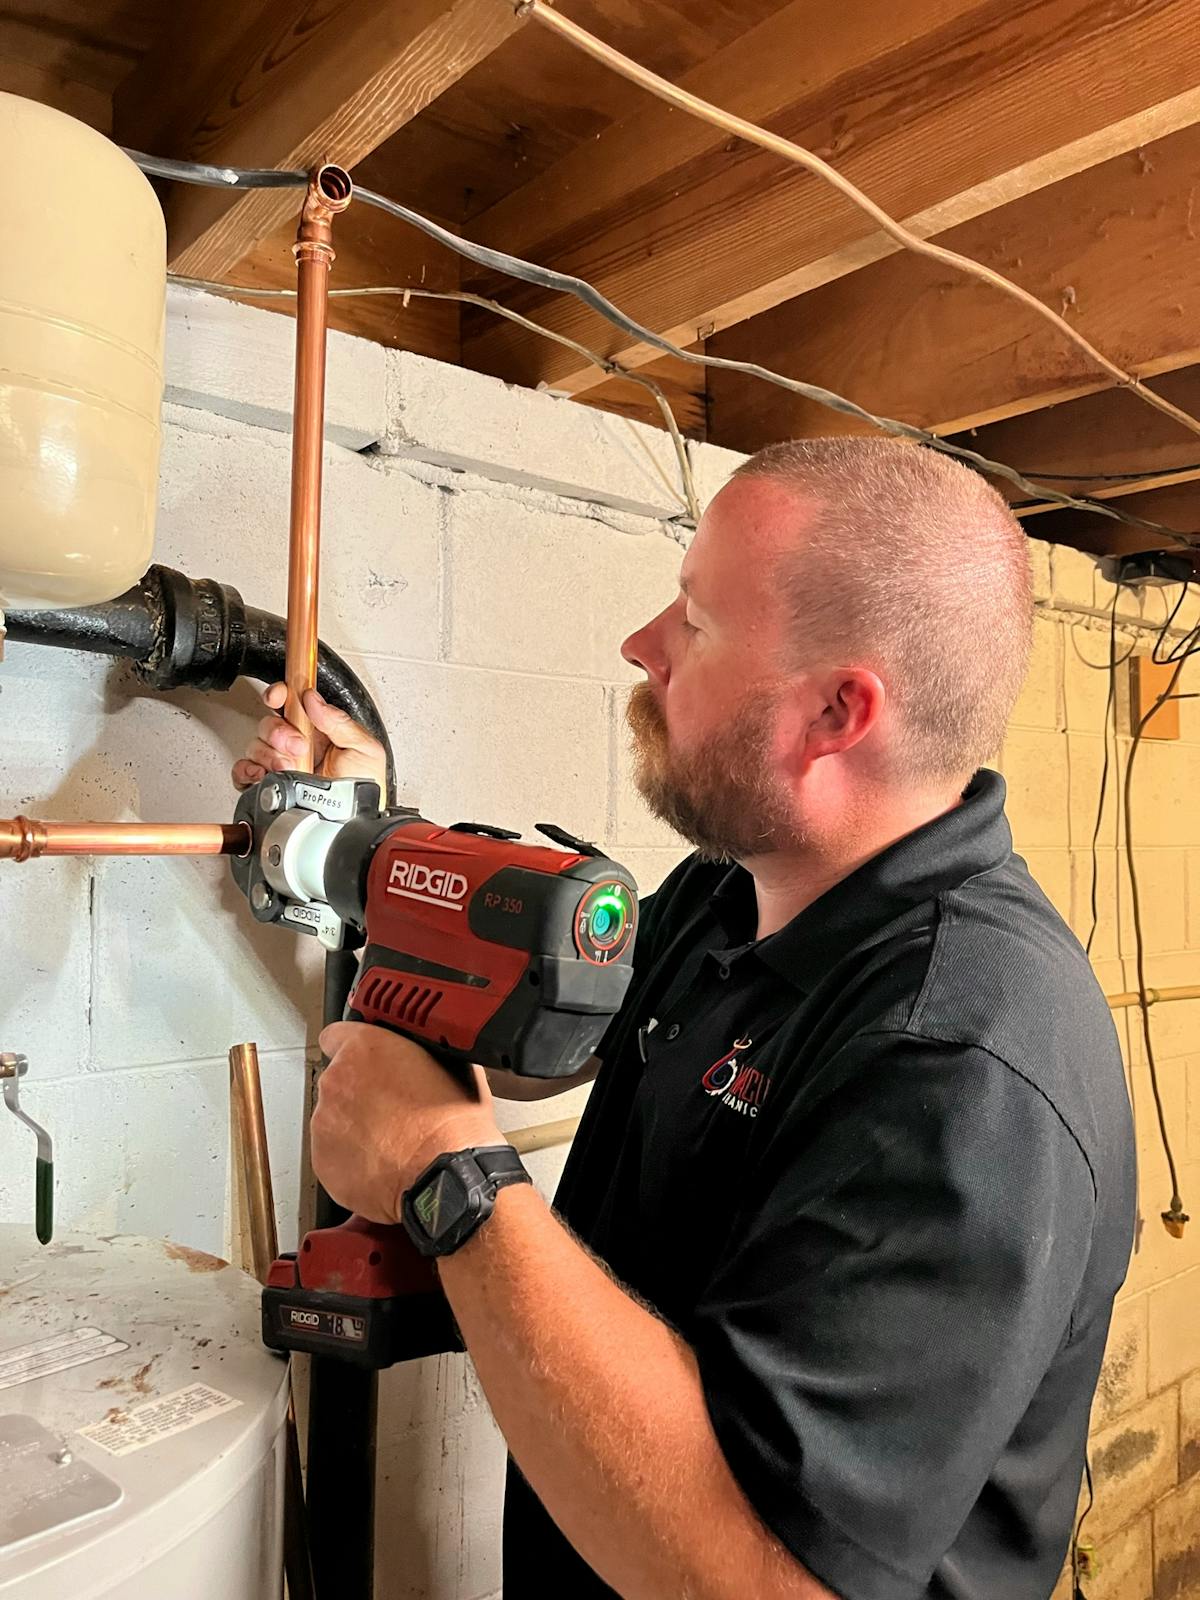 Brent Ridley works on a whole-house re-pipe project replacing corroded galvanized pipes with new copper piping and 80 lbs. of ProPress fittings donated by Viega.